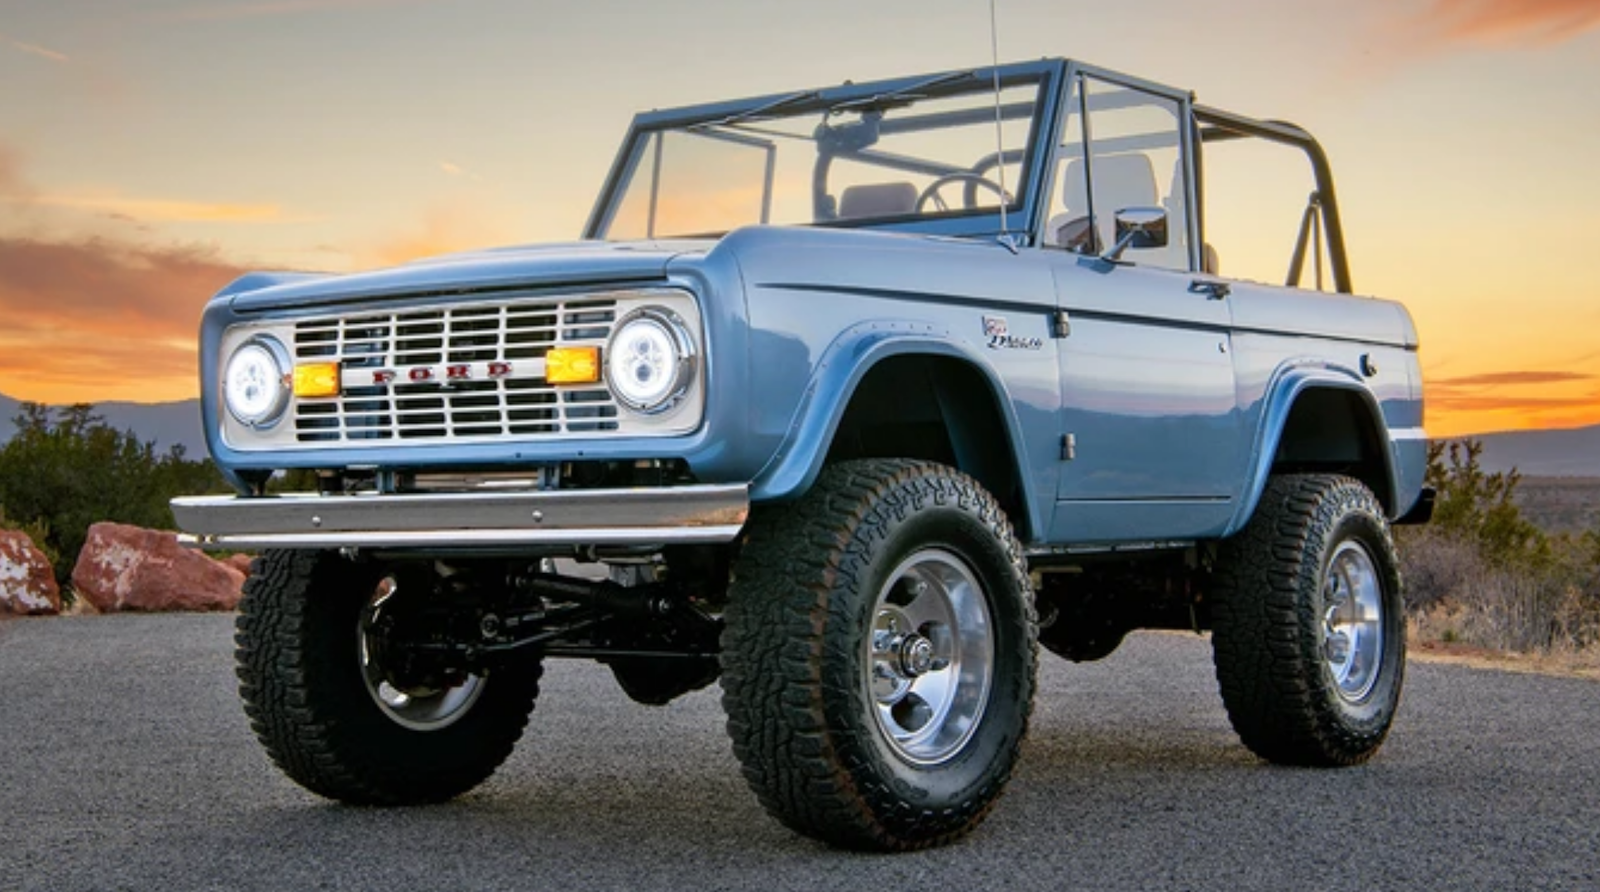 Opinion: Old Bronco Reborn as Electric